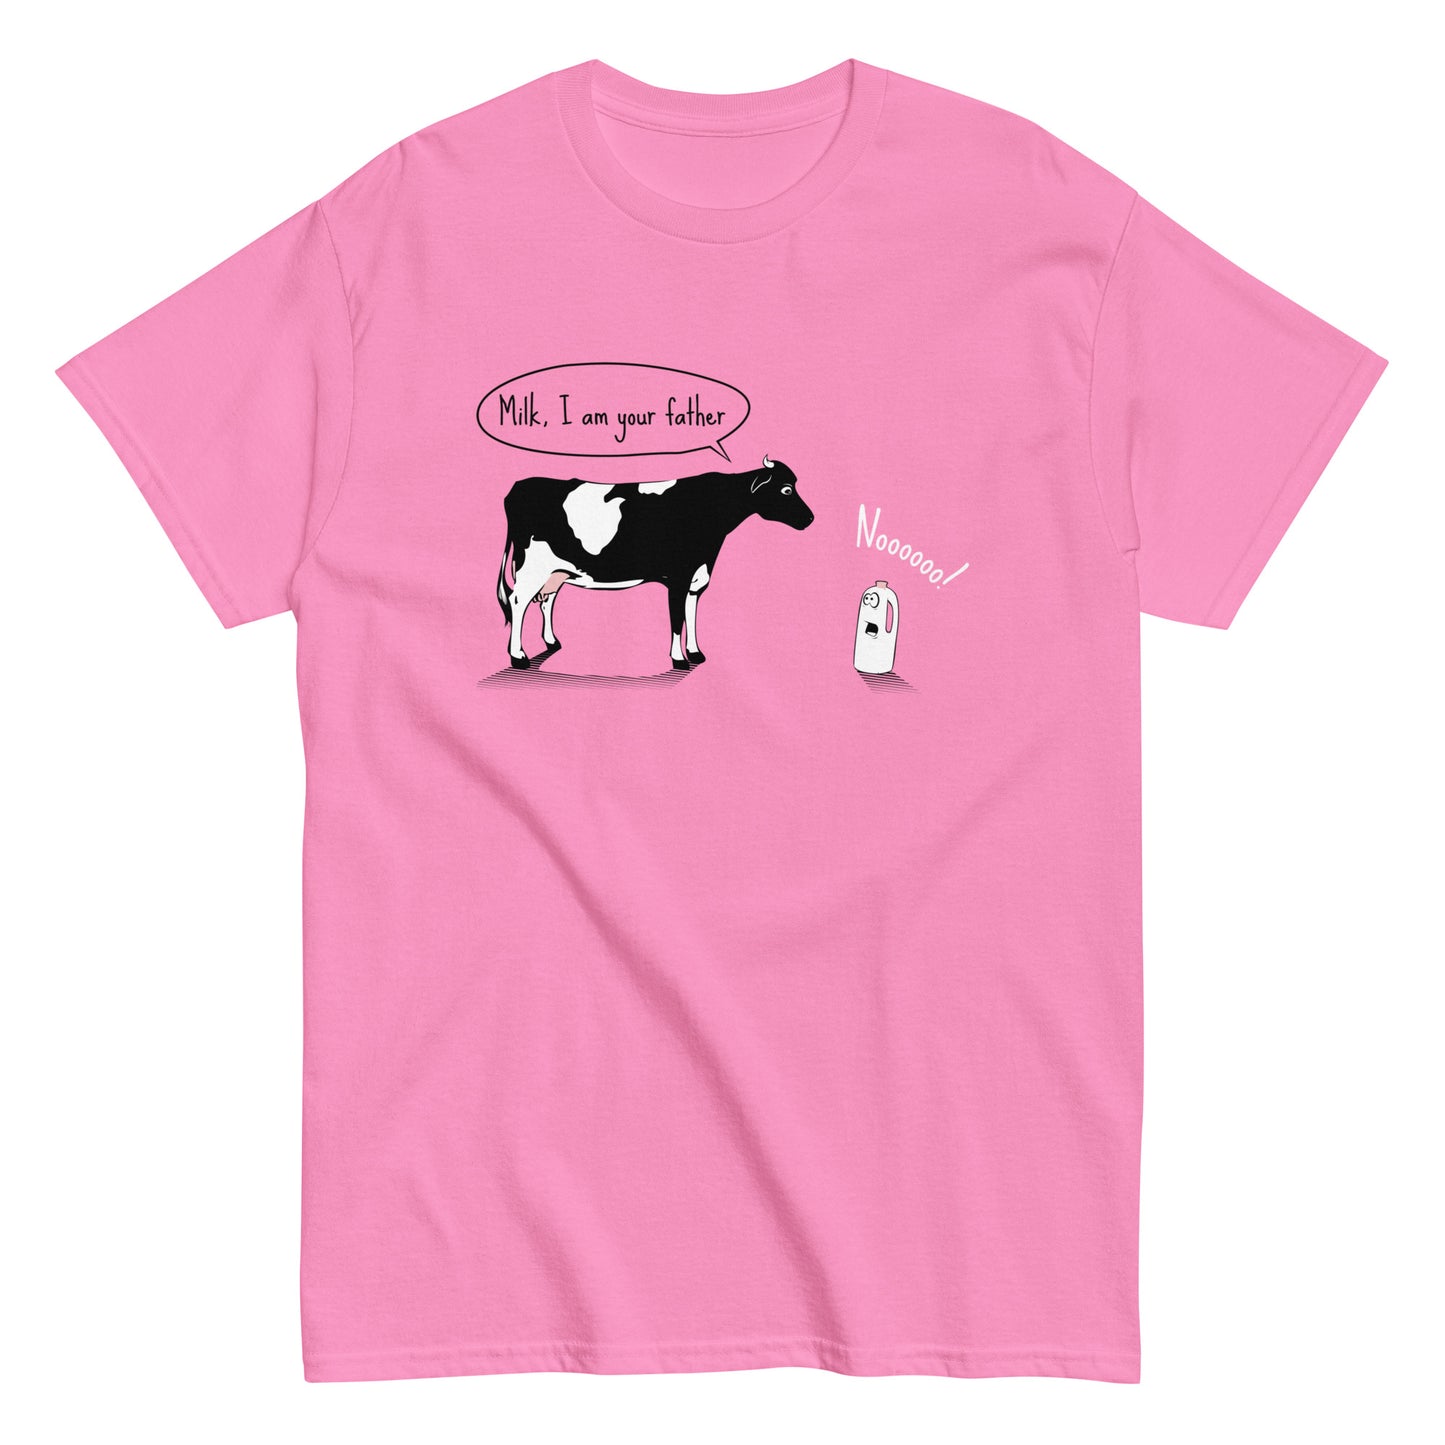 Milk, I am your father Men's Classic Tee